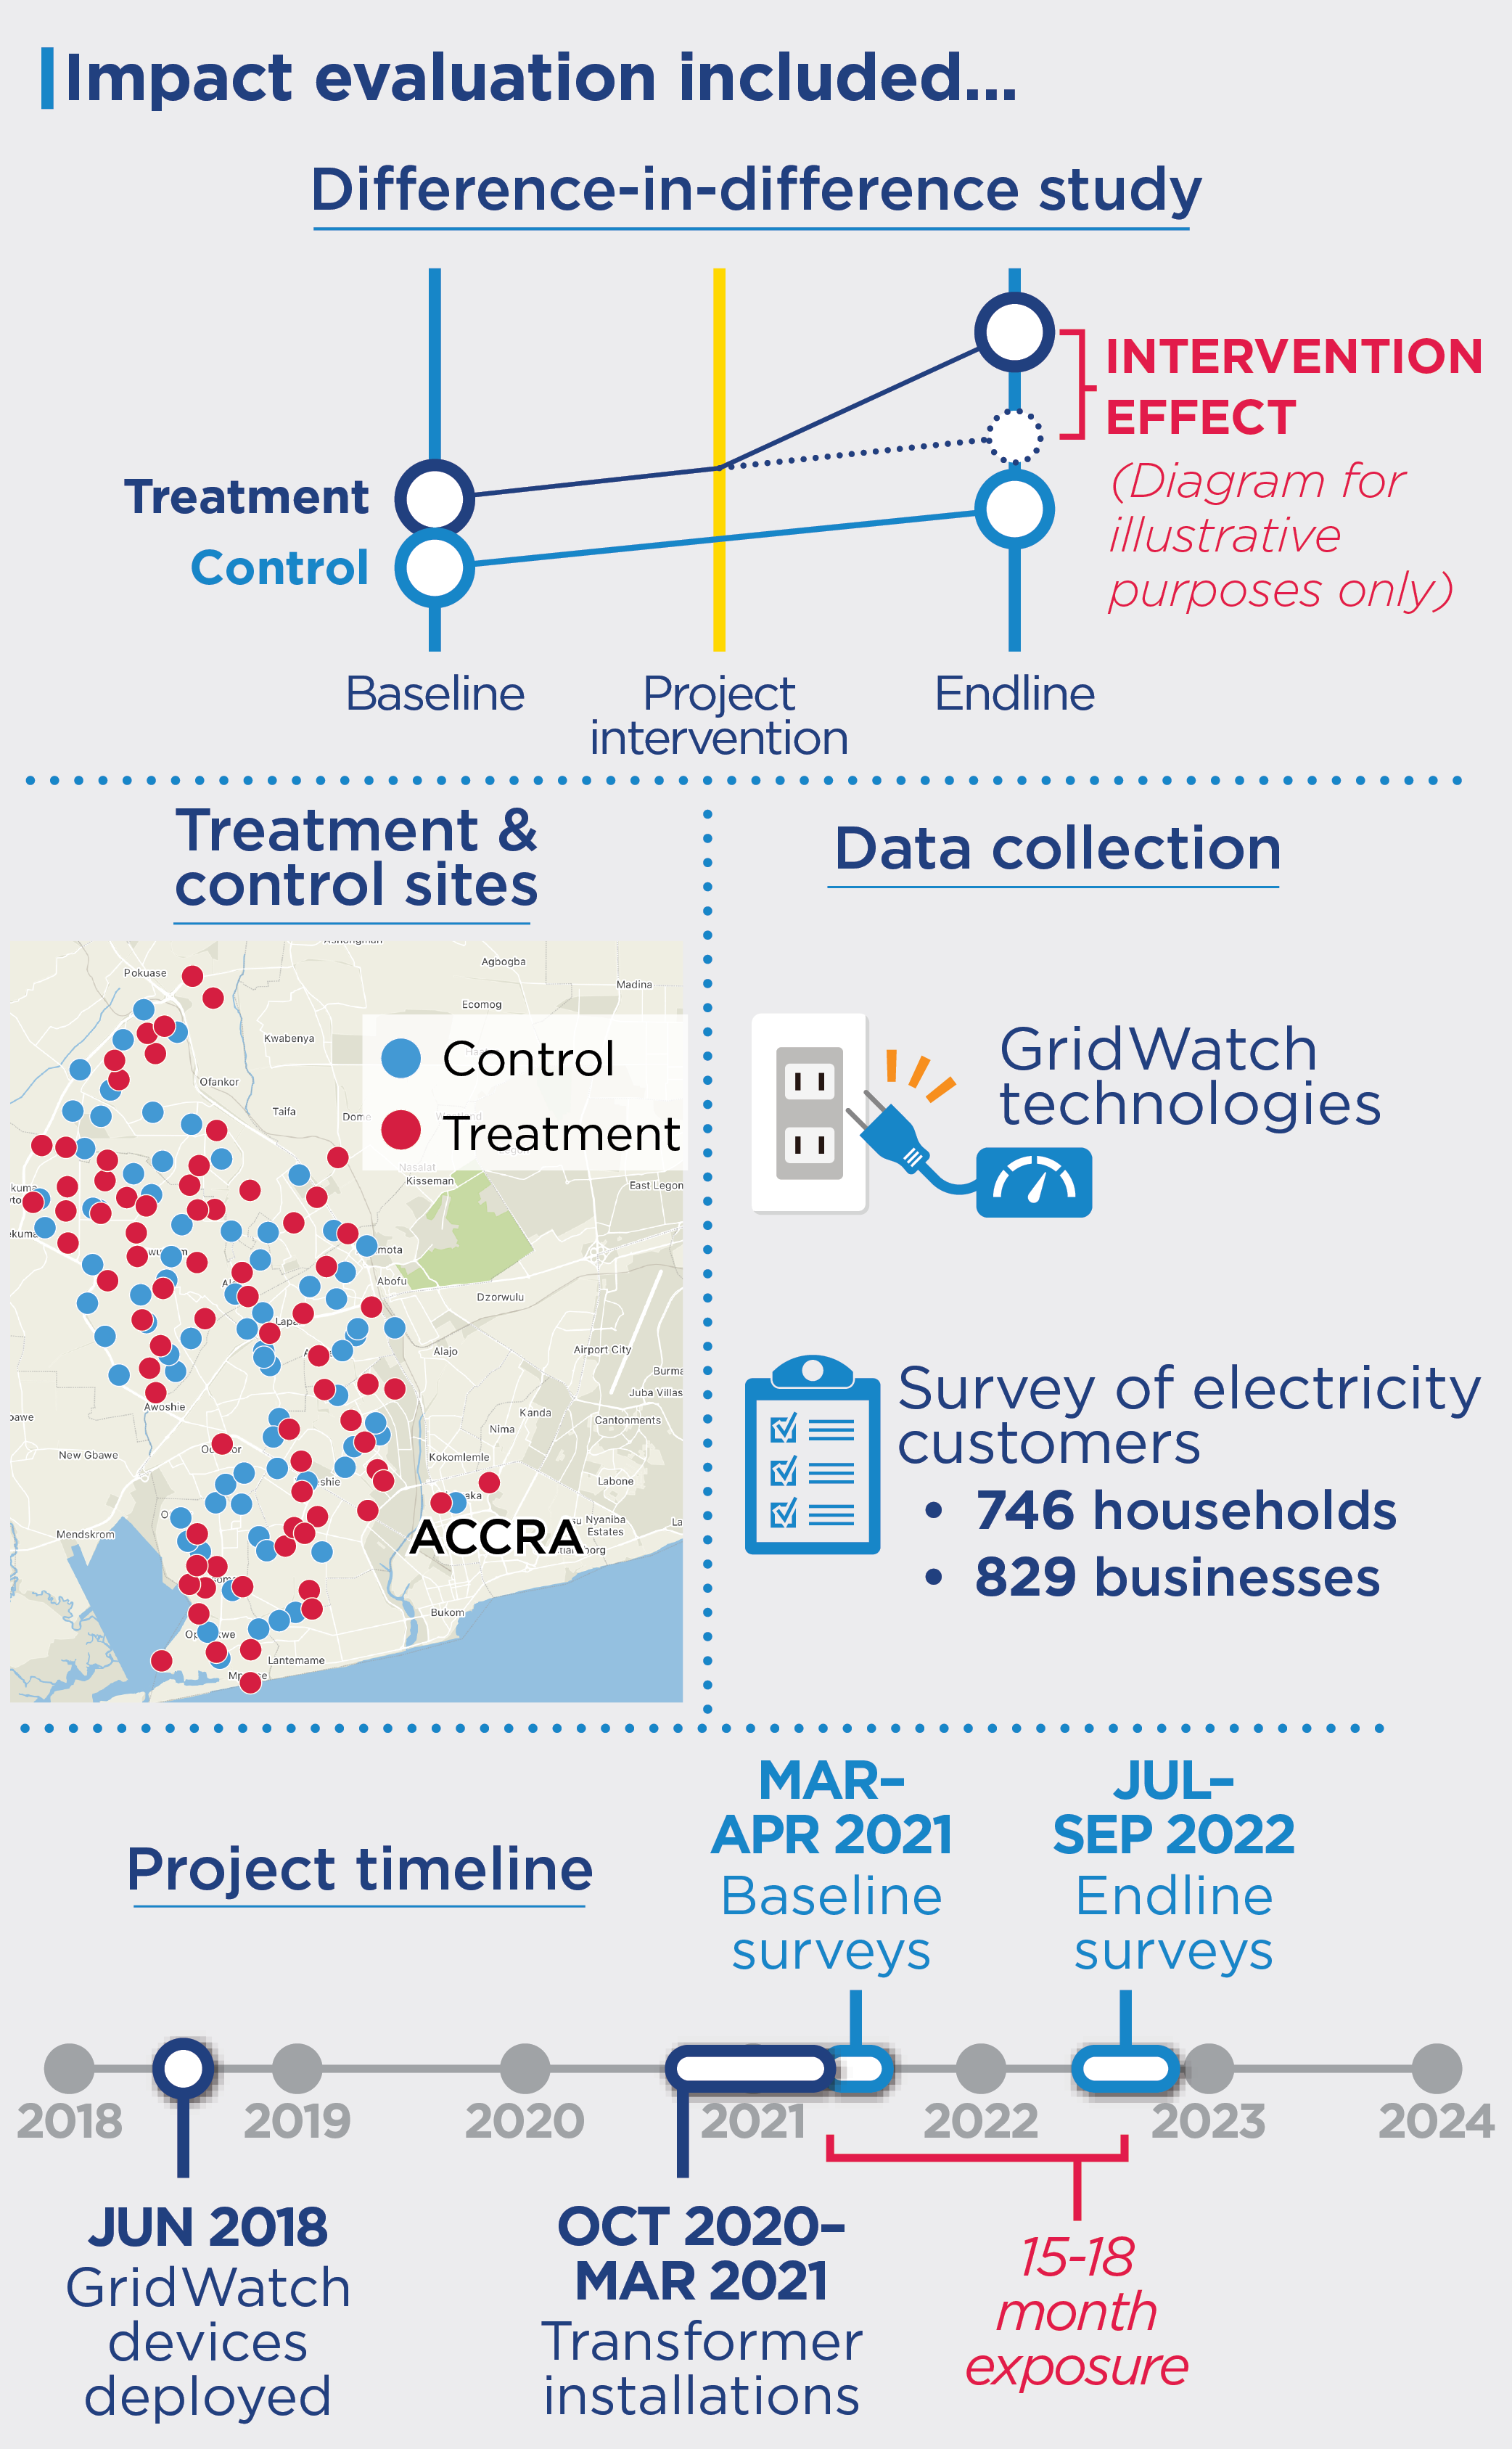 The impact evaluation included a difference in difference study. Treatment and control groups were measured before and after the project intervention, with the difference in the treatment group reflecting the intervention effect. Sites for both treatment and control were located around Accra, and data collection was done using GridWatch technology and a survey of electricty customers. This included 746 households and 829 businesses. The timeline started in June 2018 when GridWatch devices were deployed. In October 2020 to March 2021, transformers were installed. Baseline surveys were conducted in March to April 2021, and endline surveys in July to September 2022. The exposure period was 15-18 months.